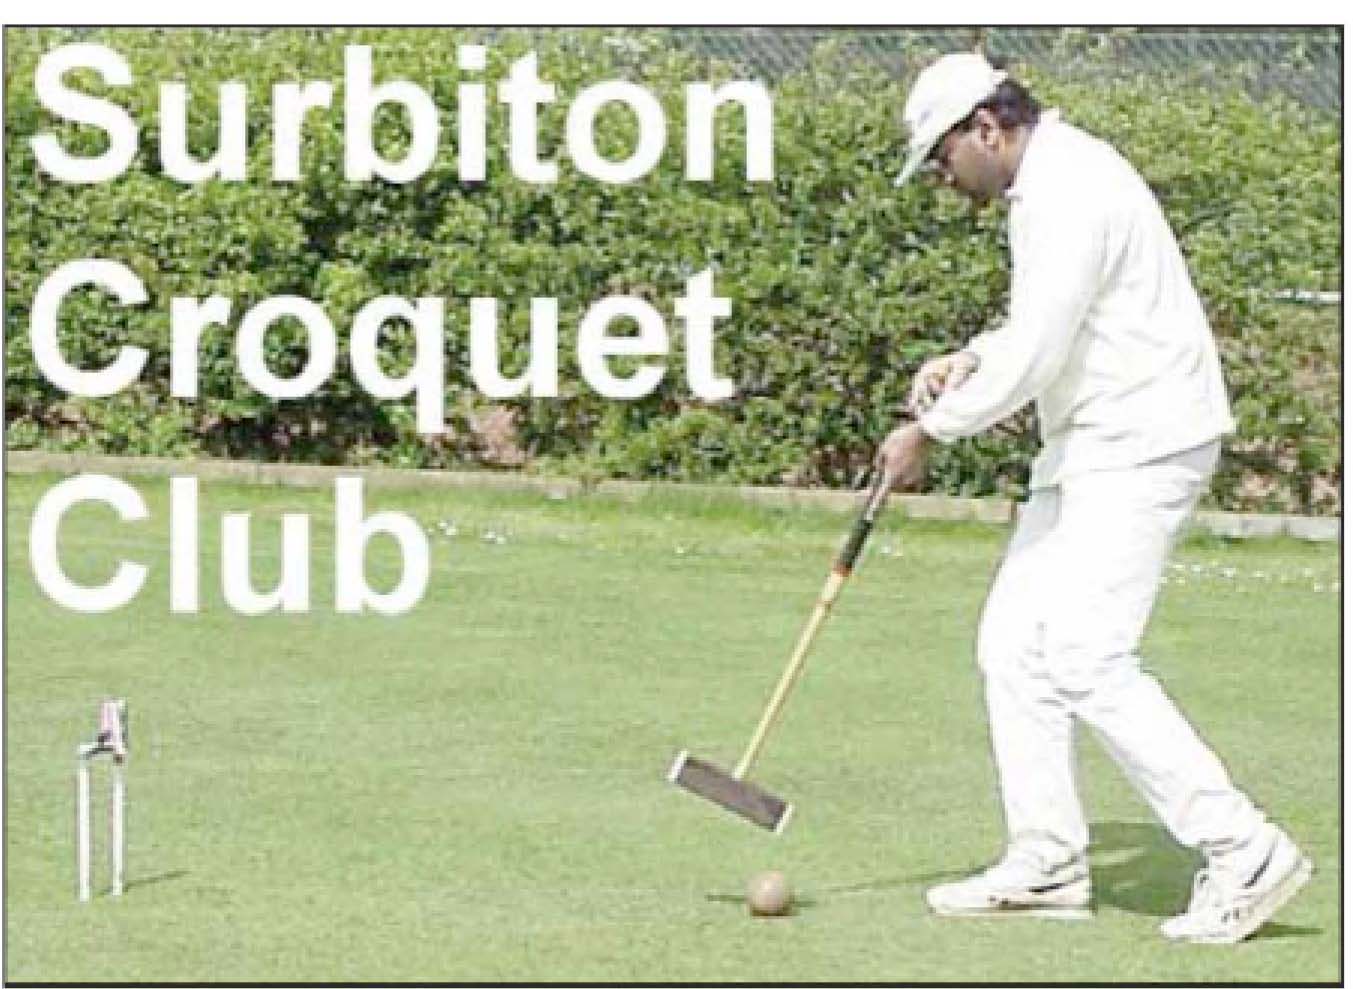 Playing croquet